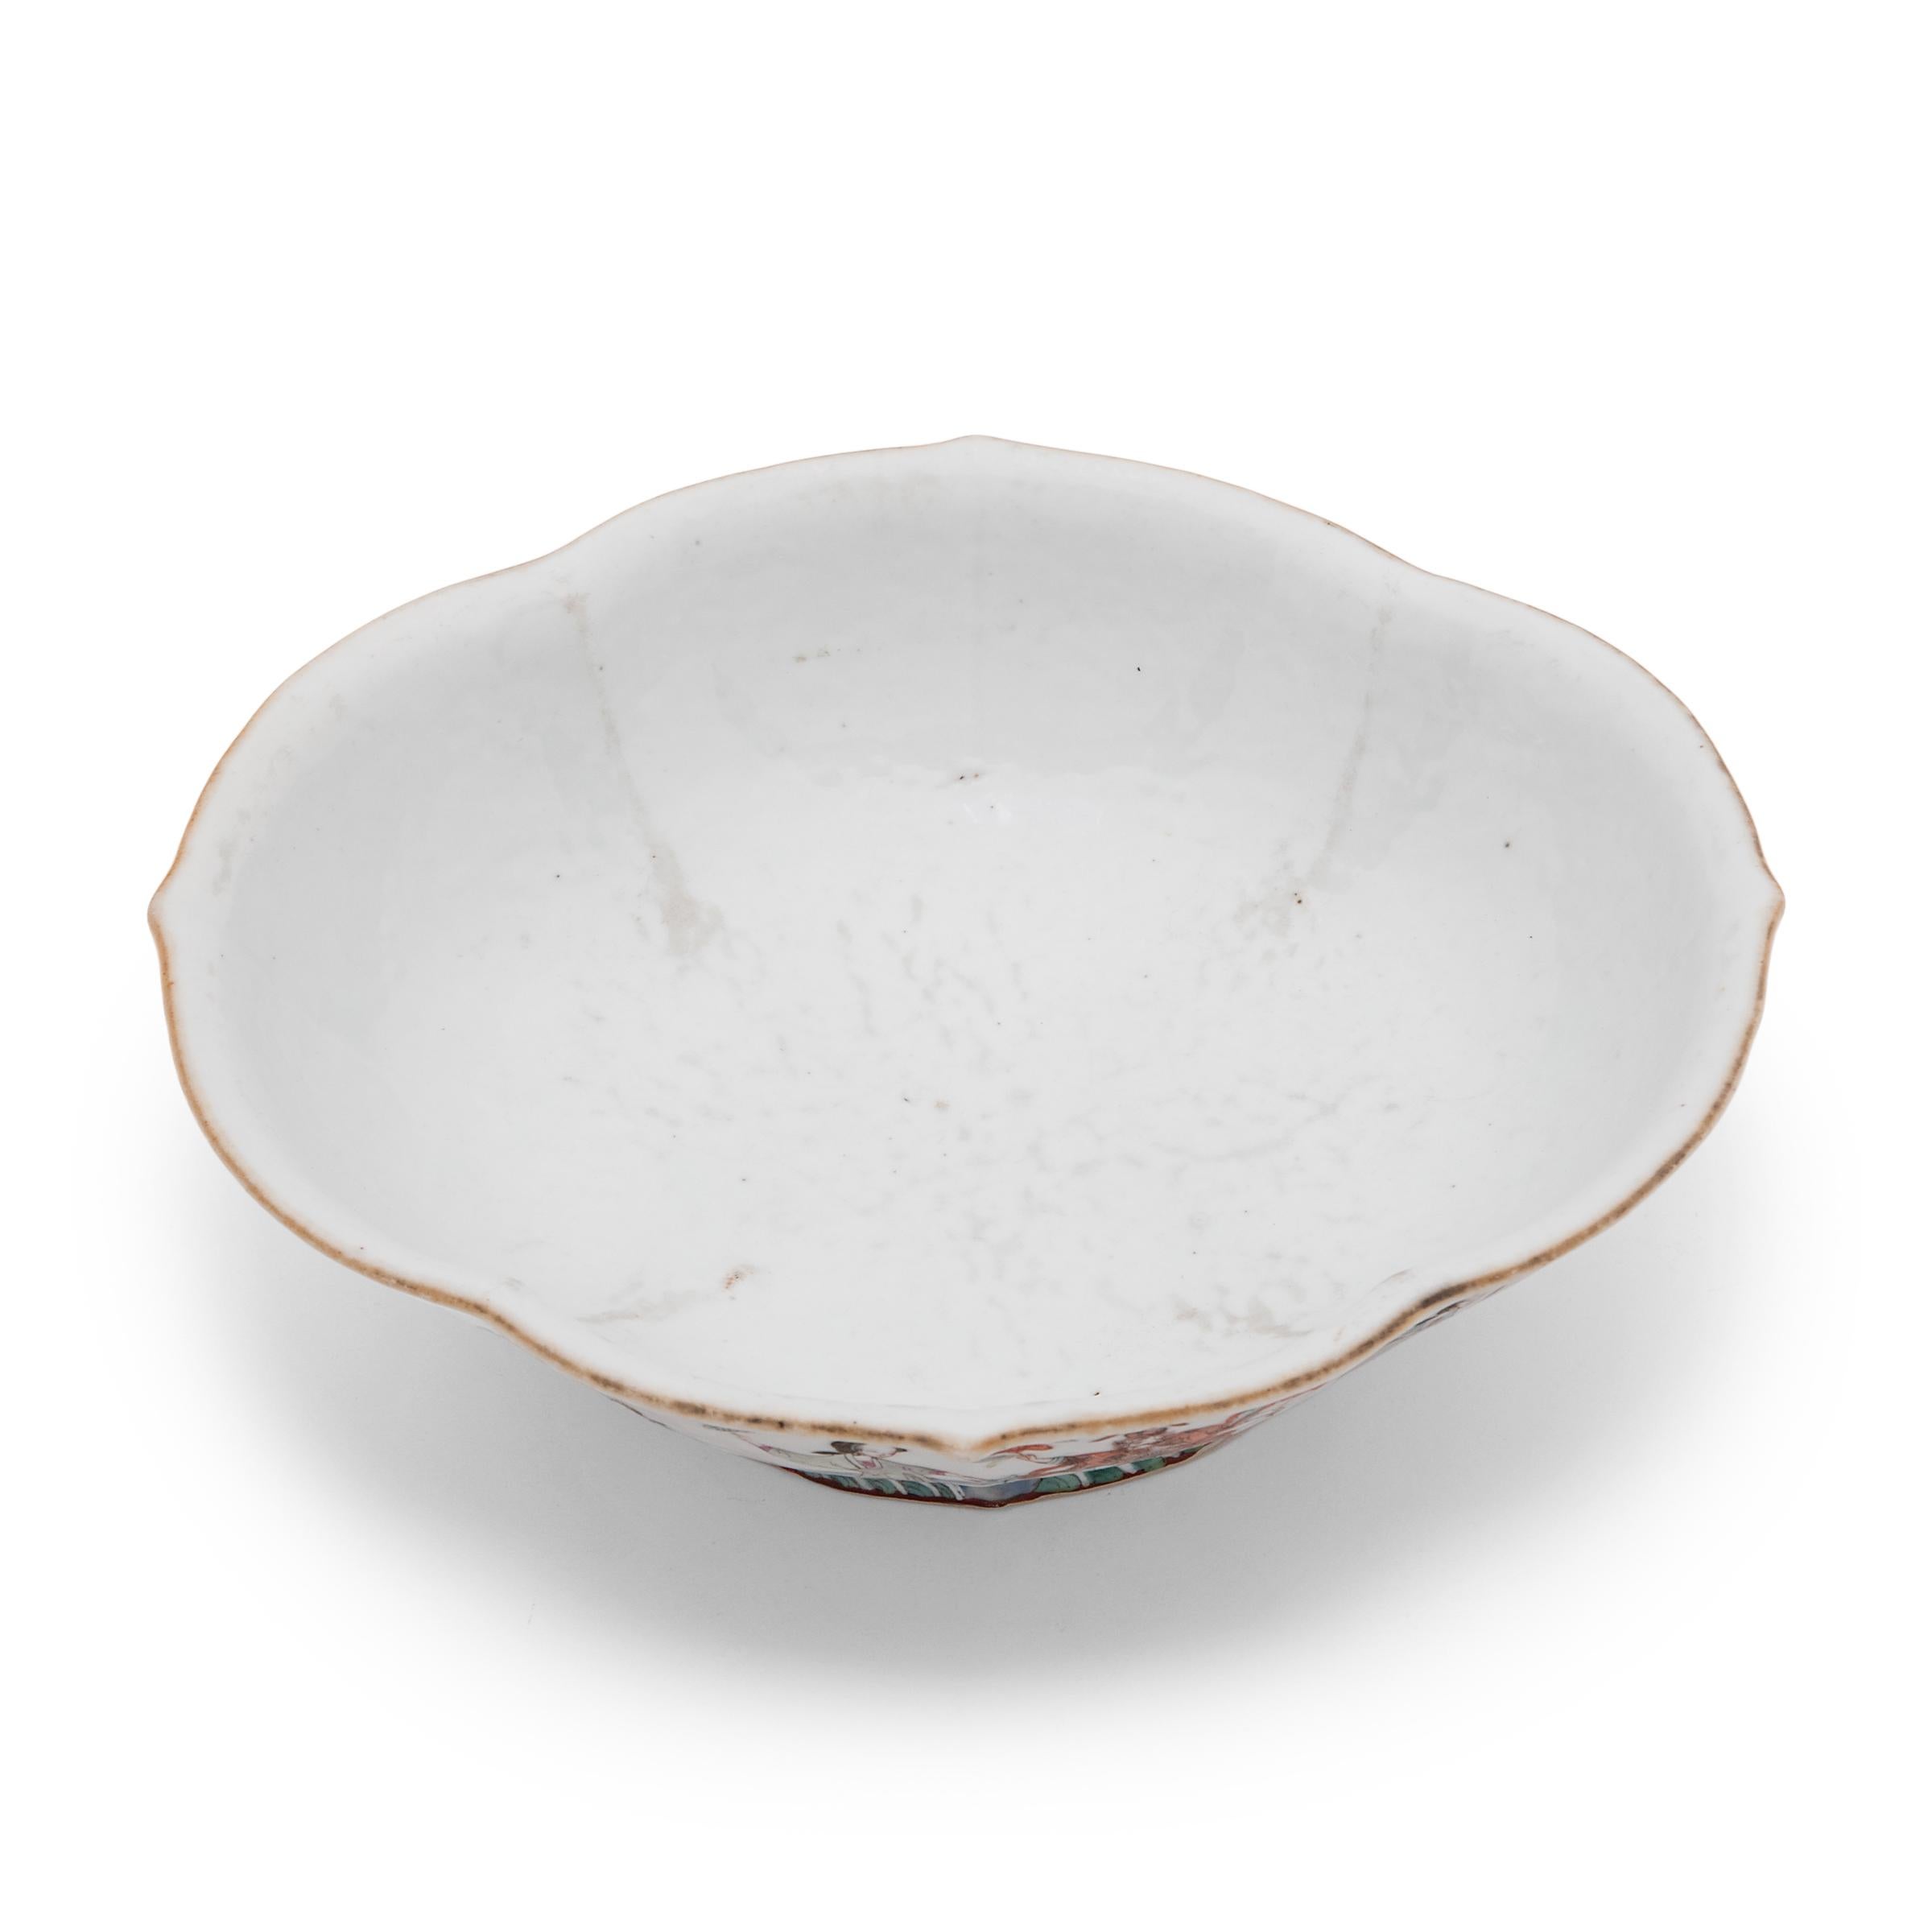 19th Century Chinese Famille Rose Footed Offering Bowl, c. 1900 For Sale